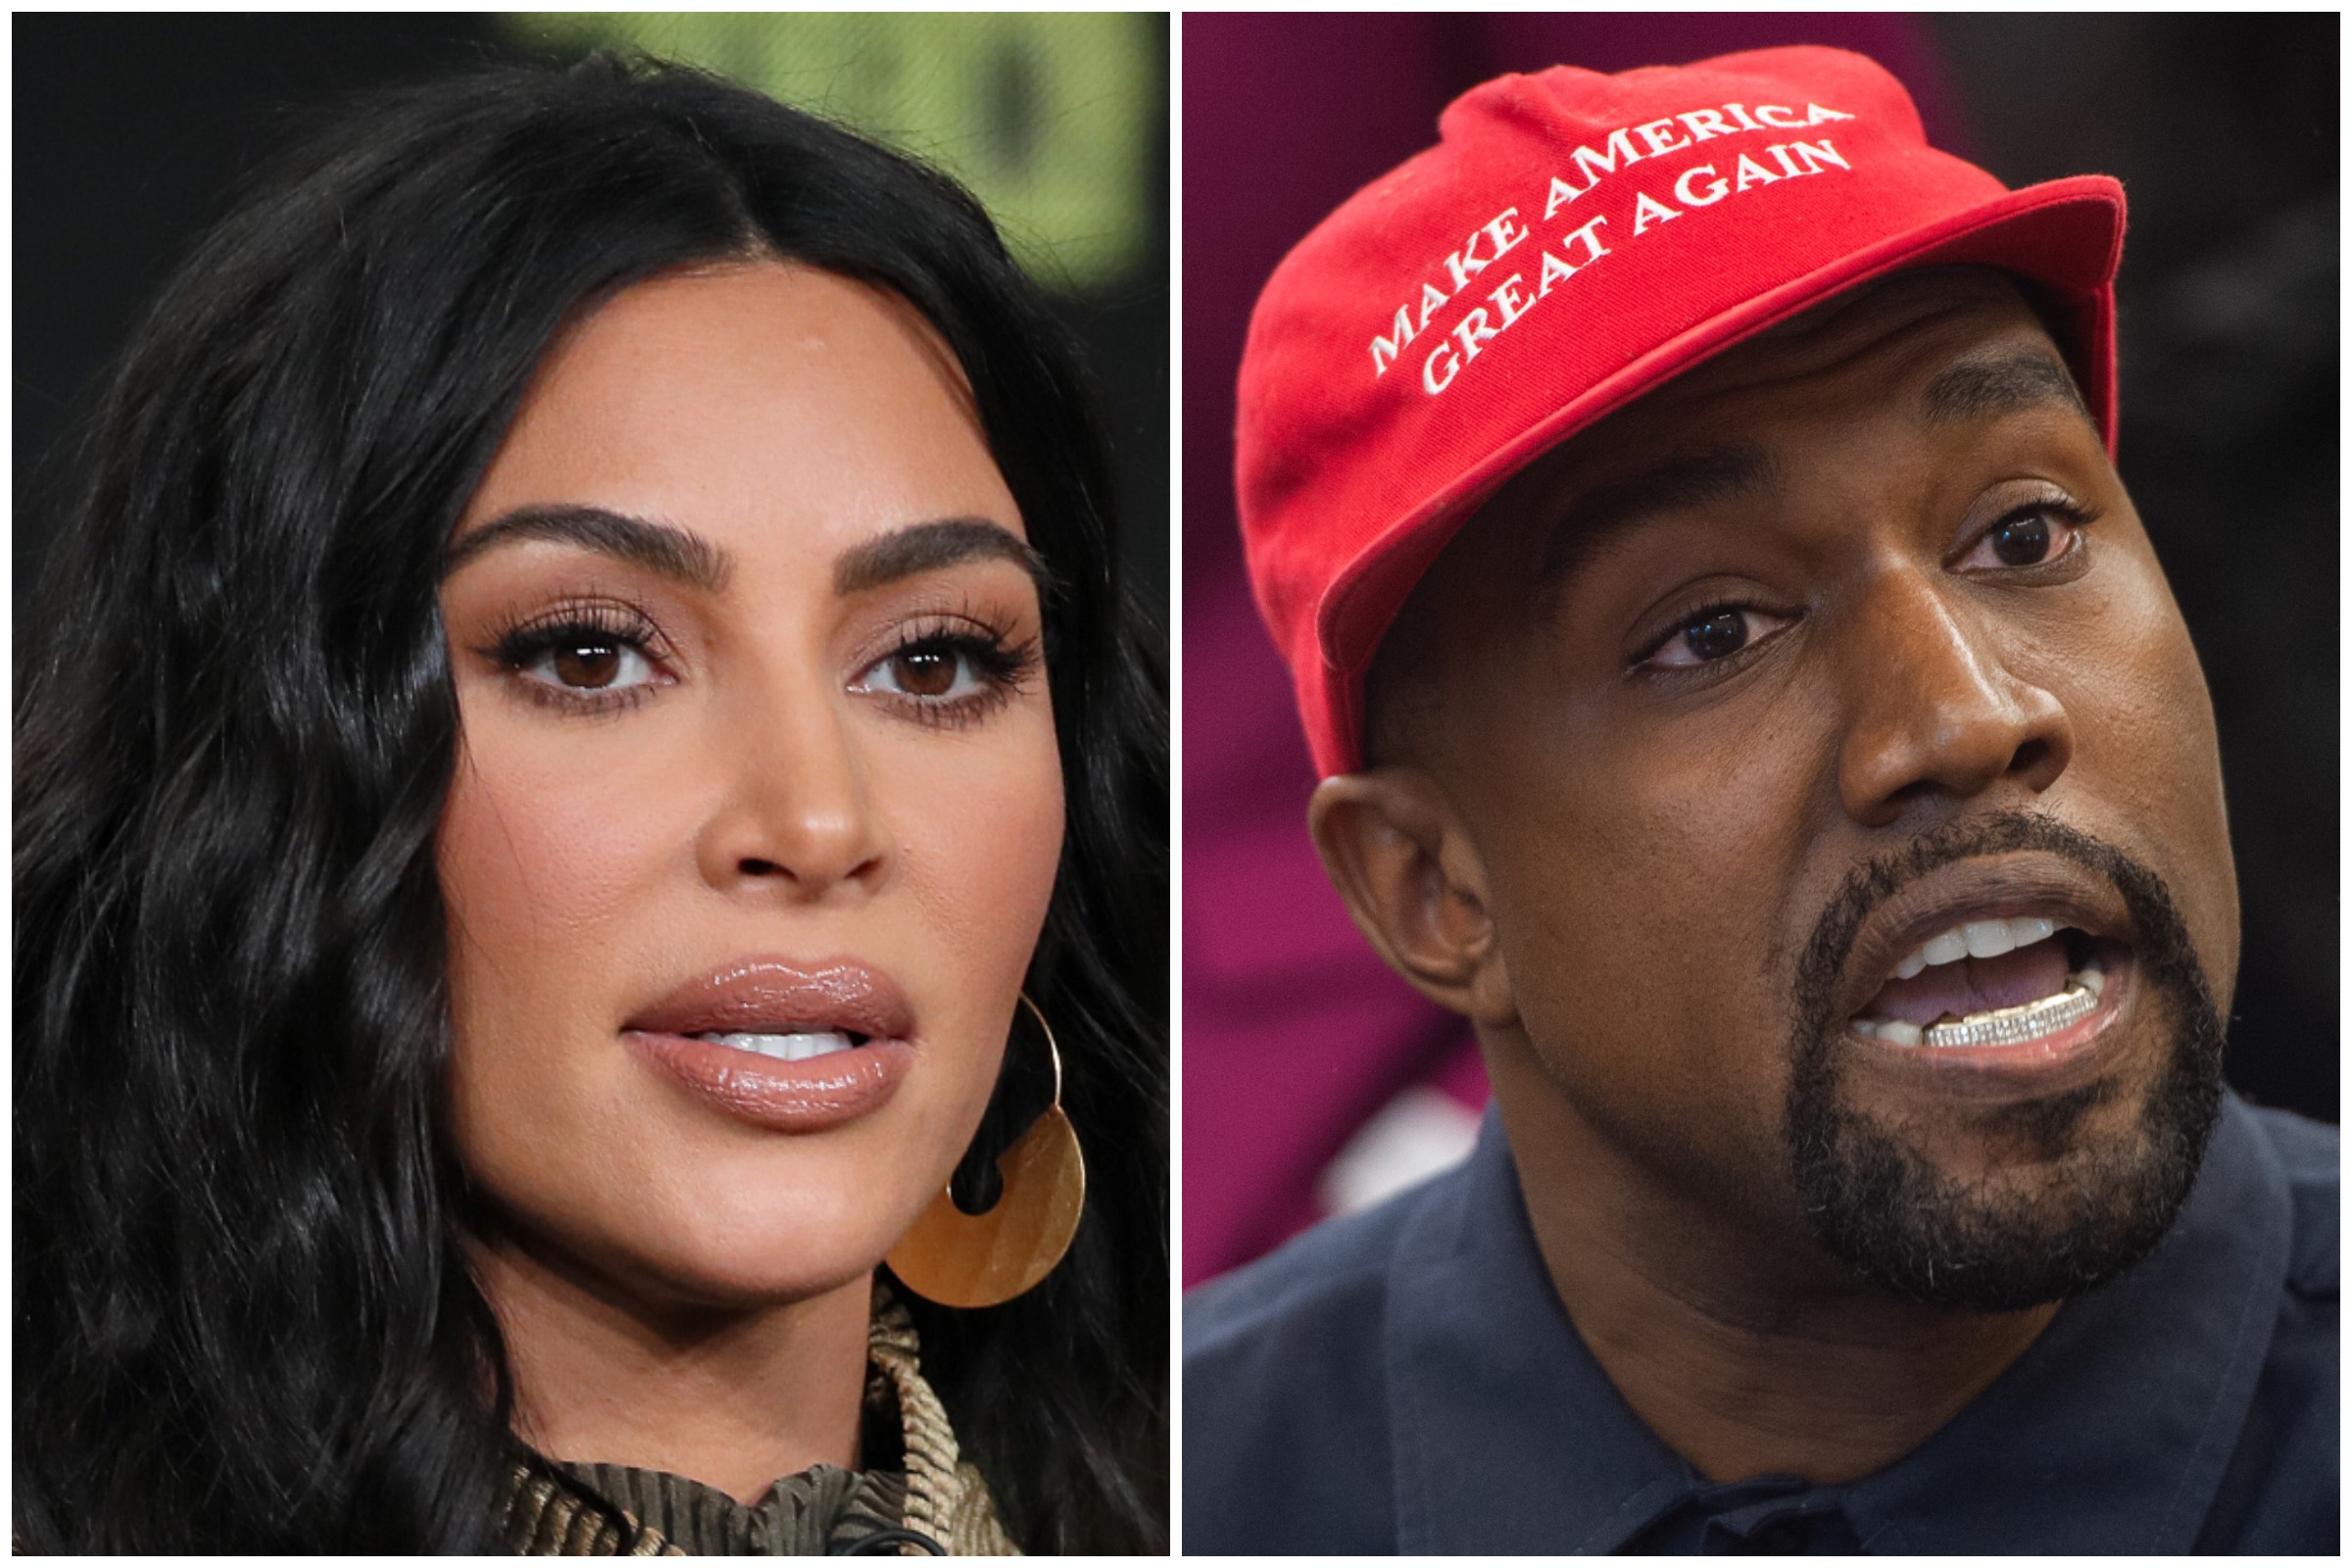 Kim Kardashian & Kanye West: What We're All Getting Wrong About